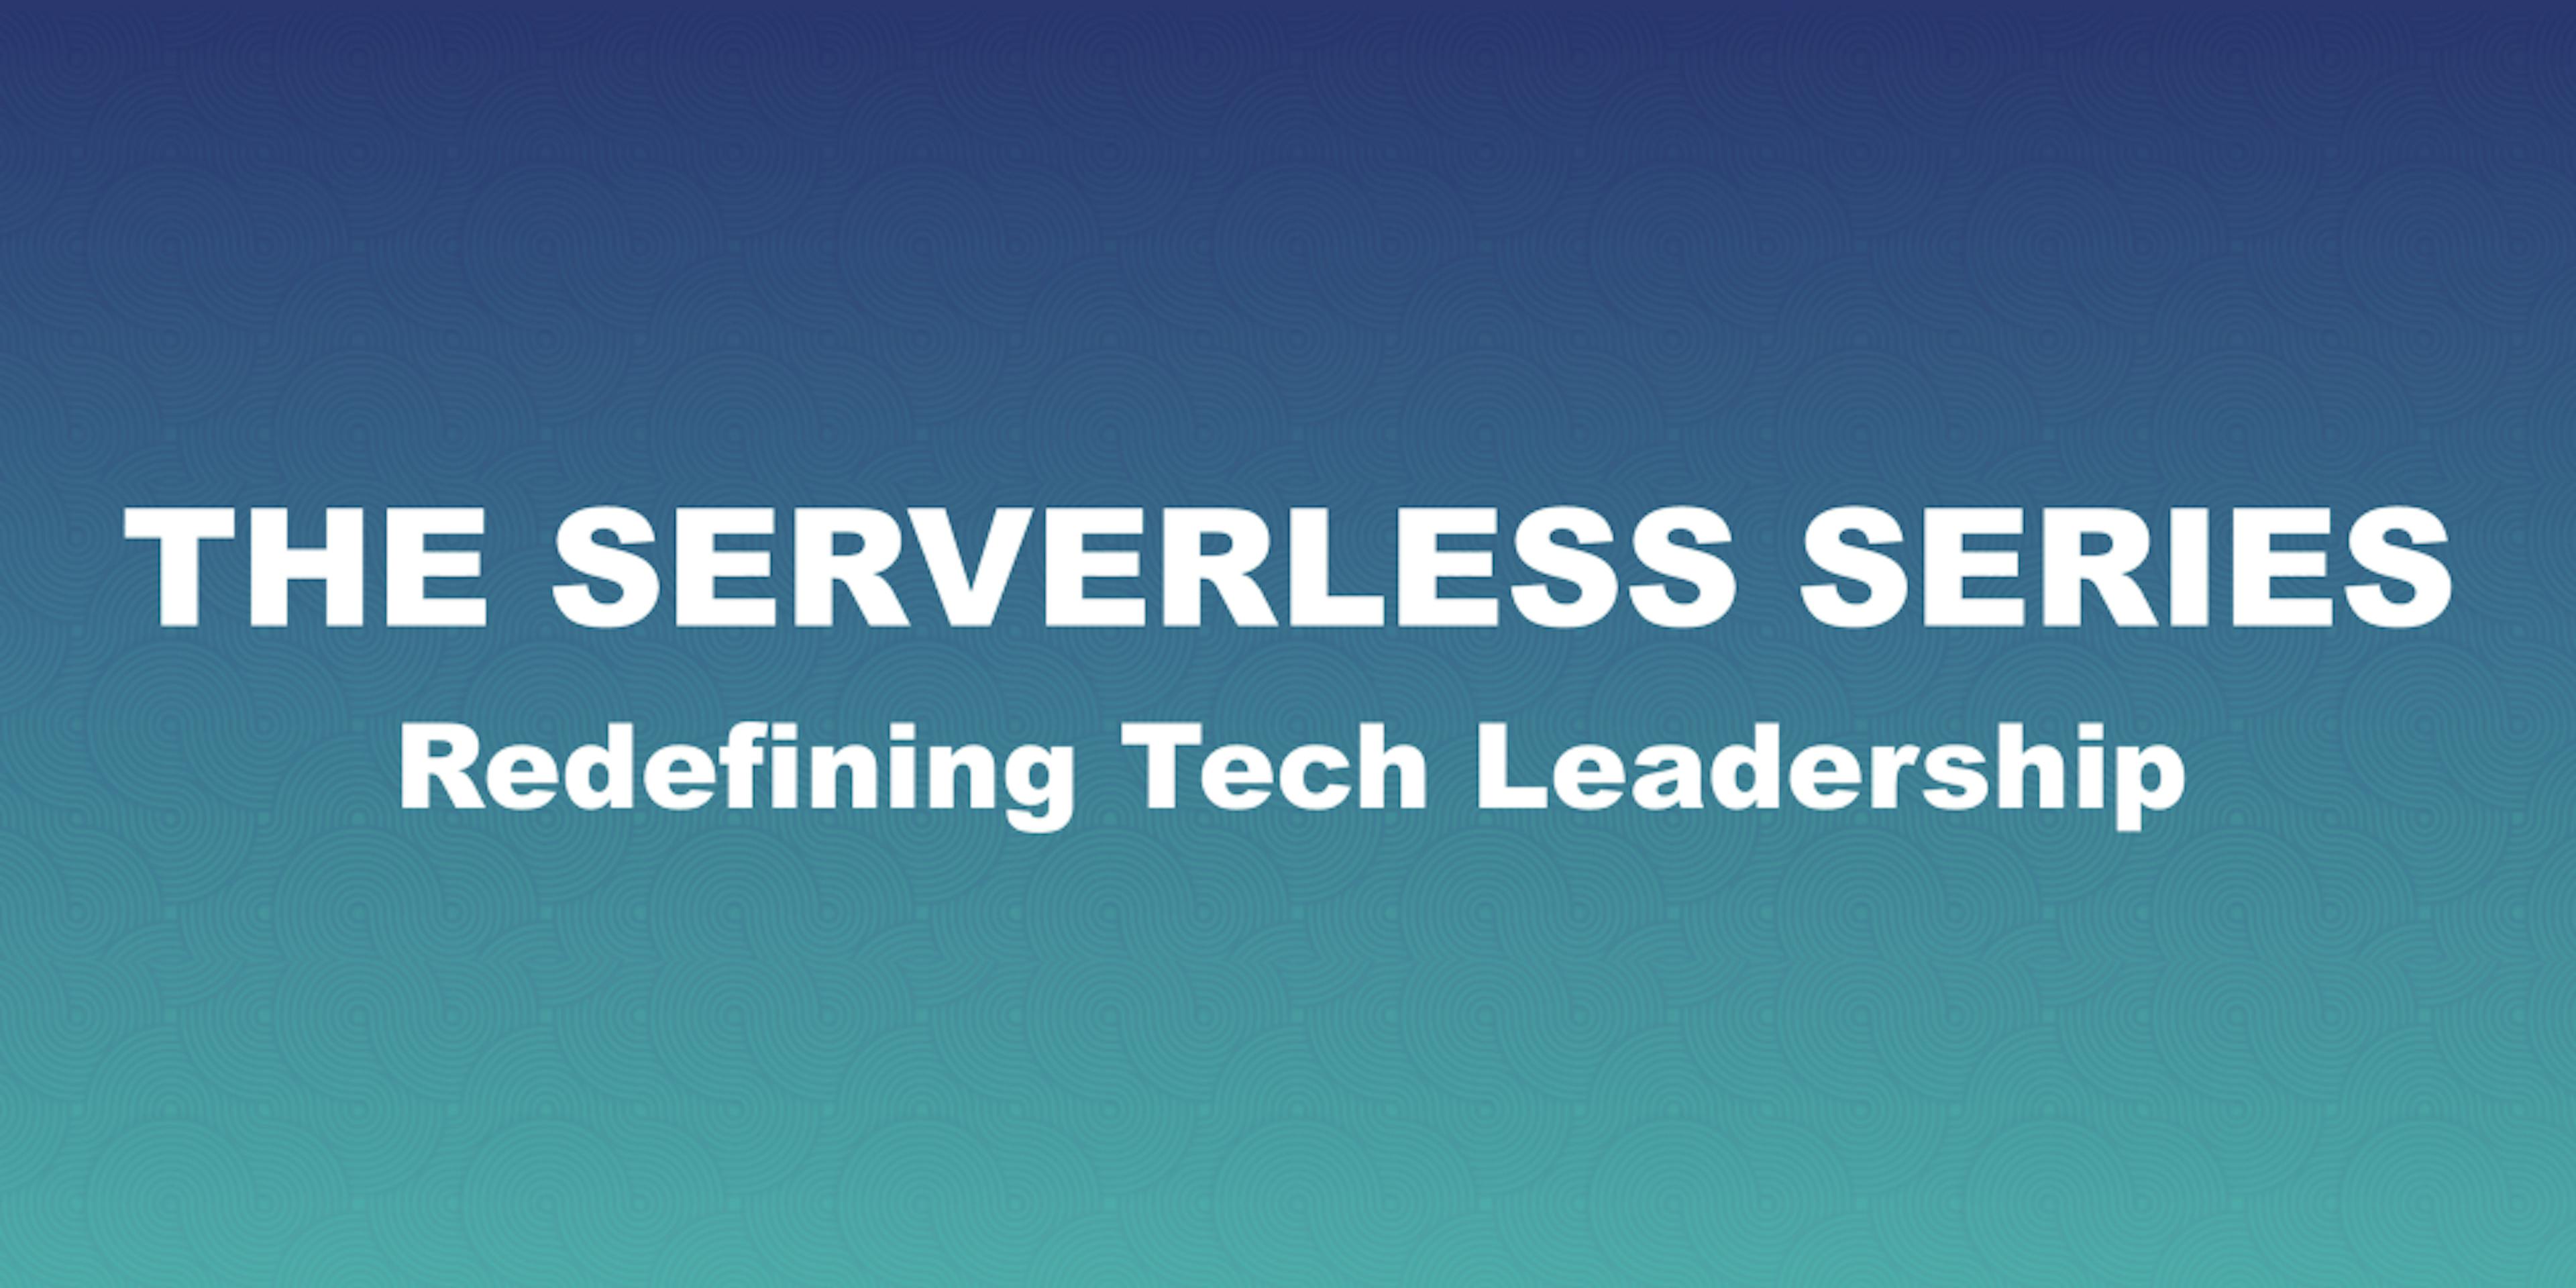 /the-serverless-series-automating-it-engineers-reshaping-tech-leadership-788cf9b625d5 feature image